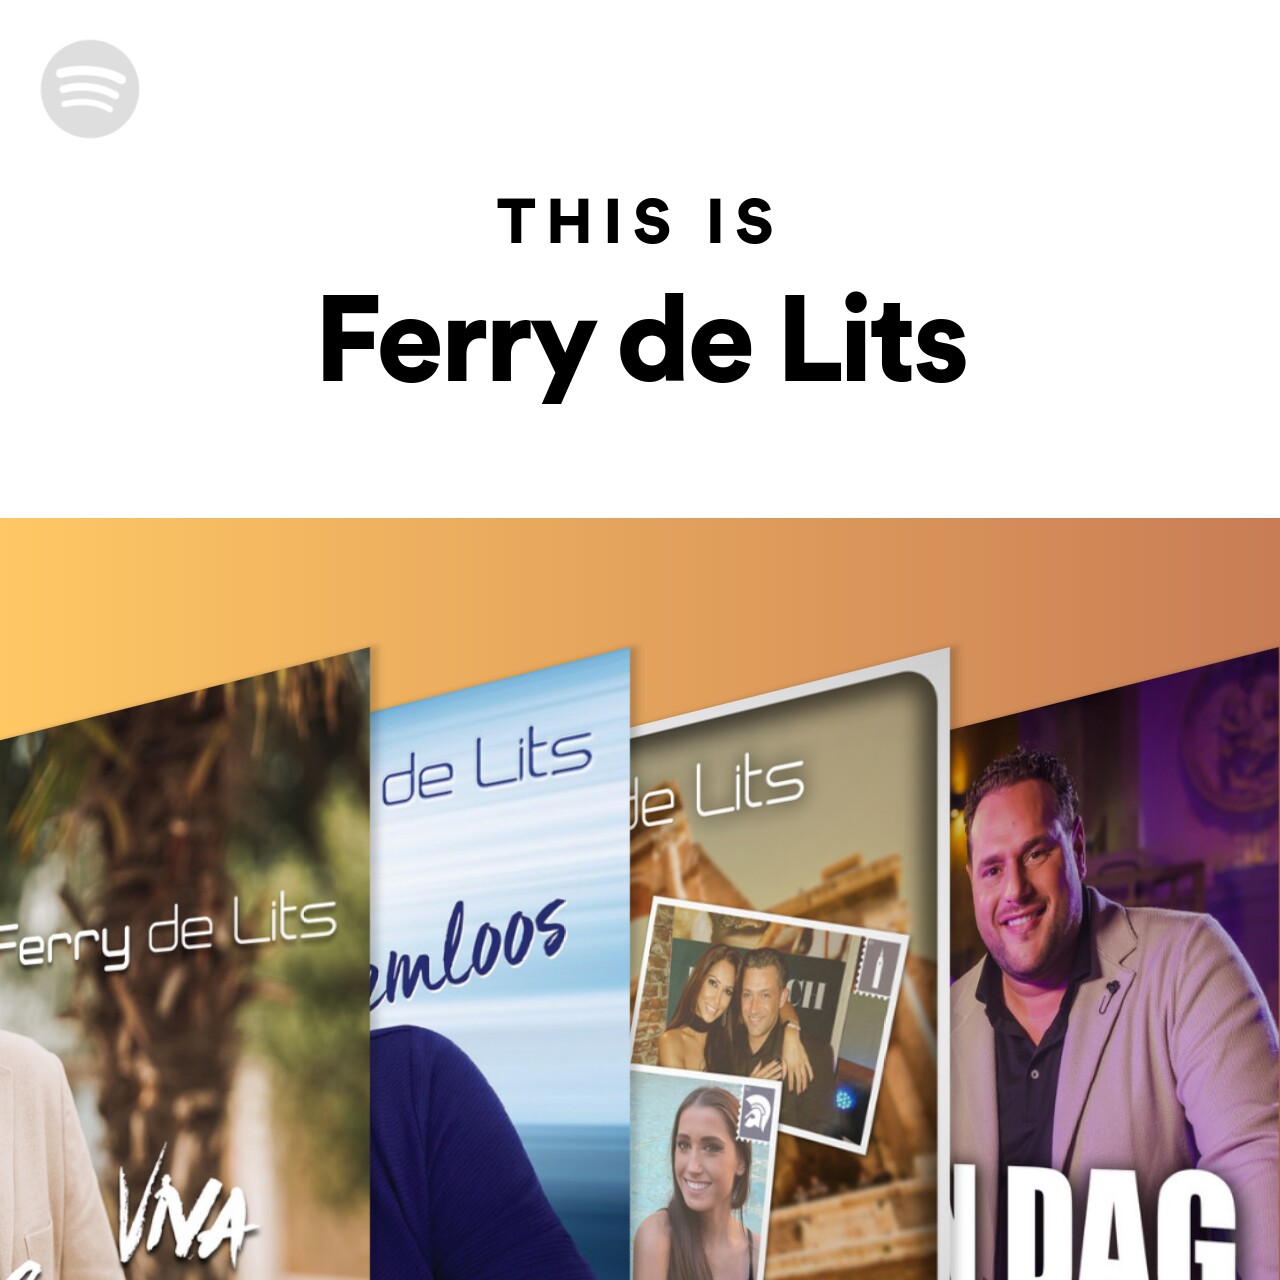 This is Ferry de Lits